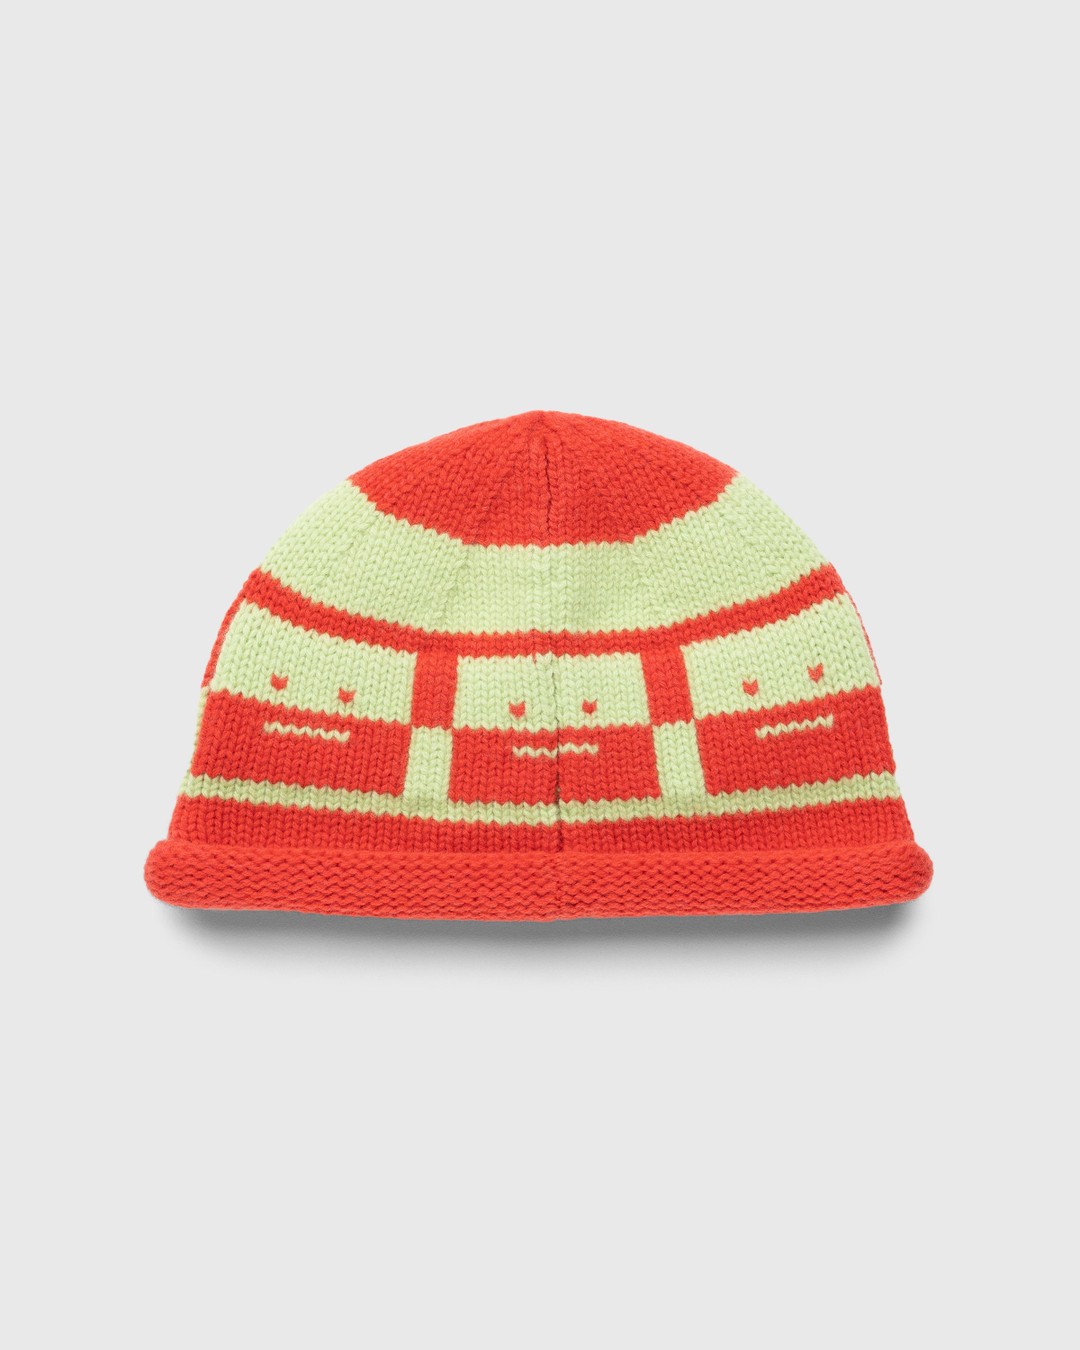 Acne Studios – Checkerboard Face Beanie Red - Beanies - Multi - Image 2